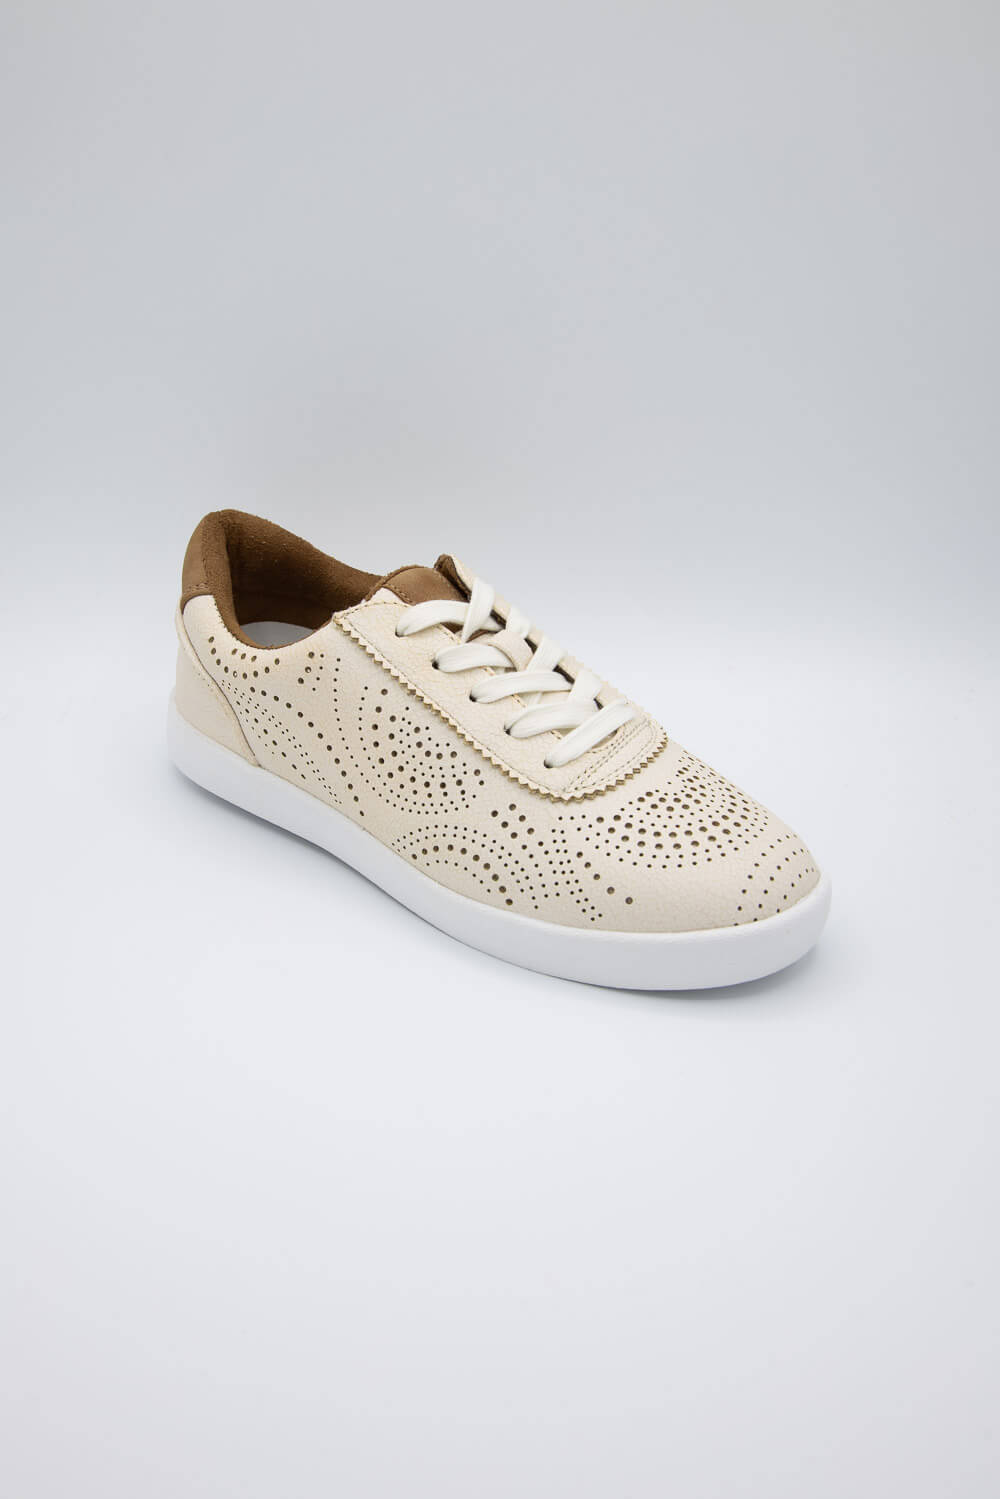 Very G Lace Sneakers for in Cream | VGSP0212-CREAM – Glik's